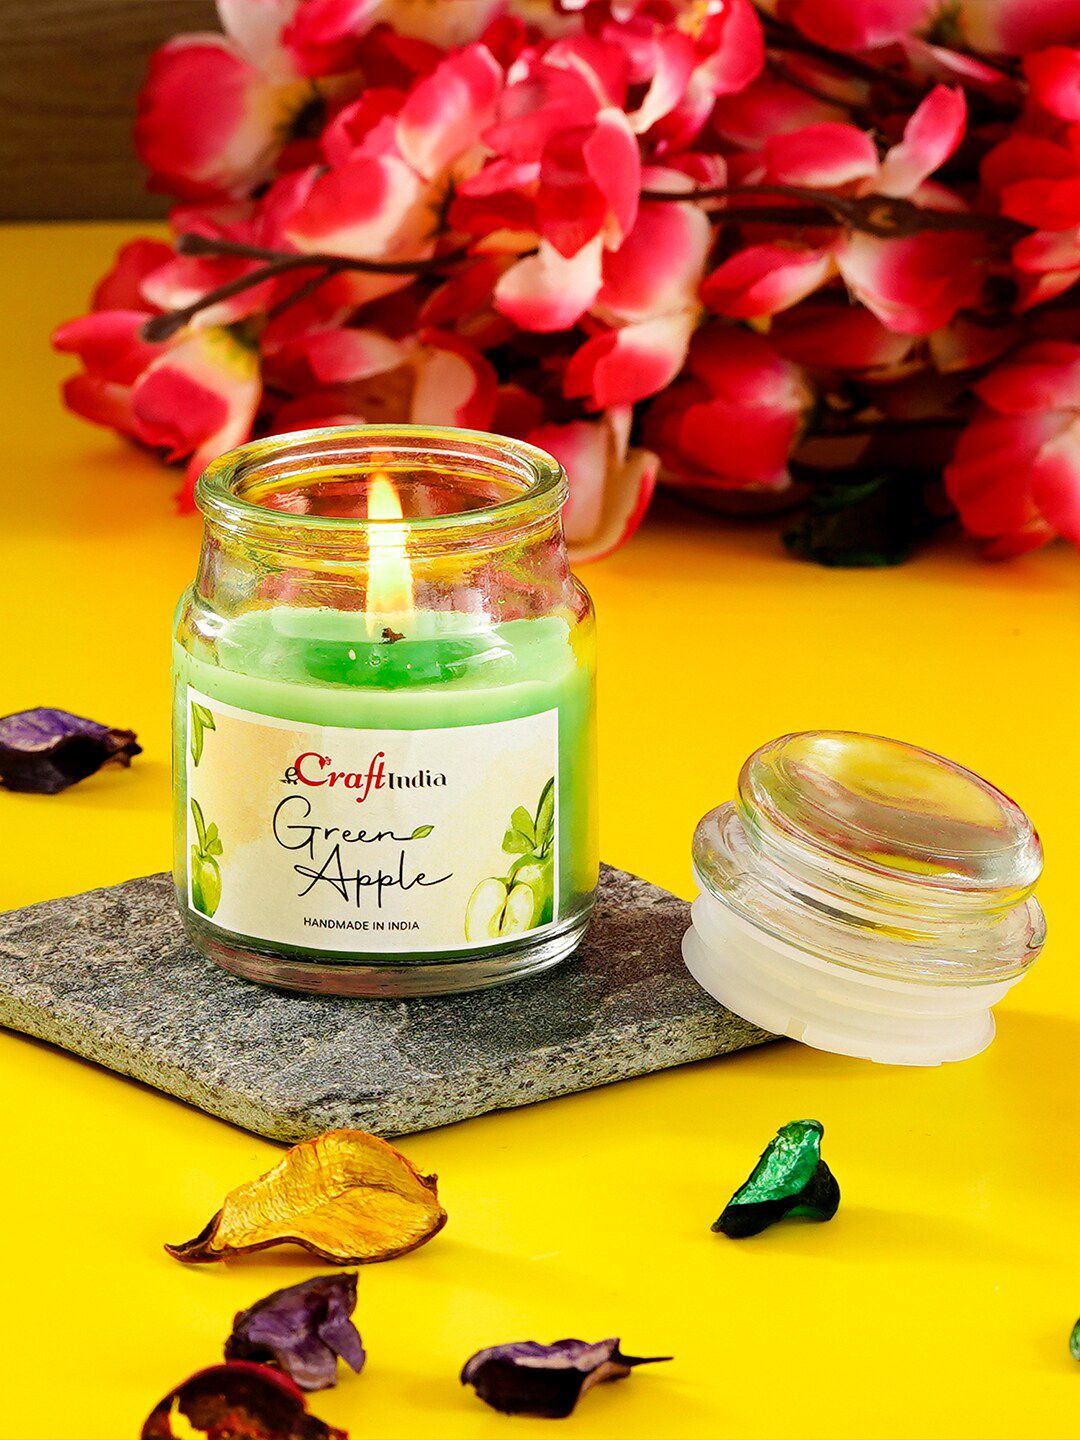 eCraftIndia Green Apple Scented Jar Candle Price in India